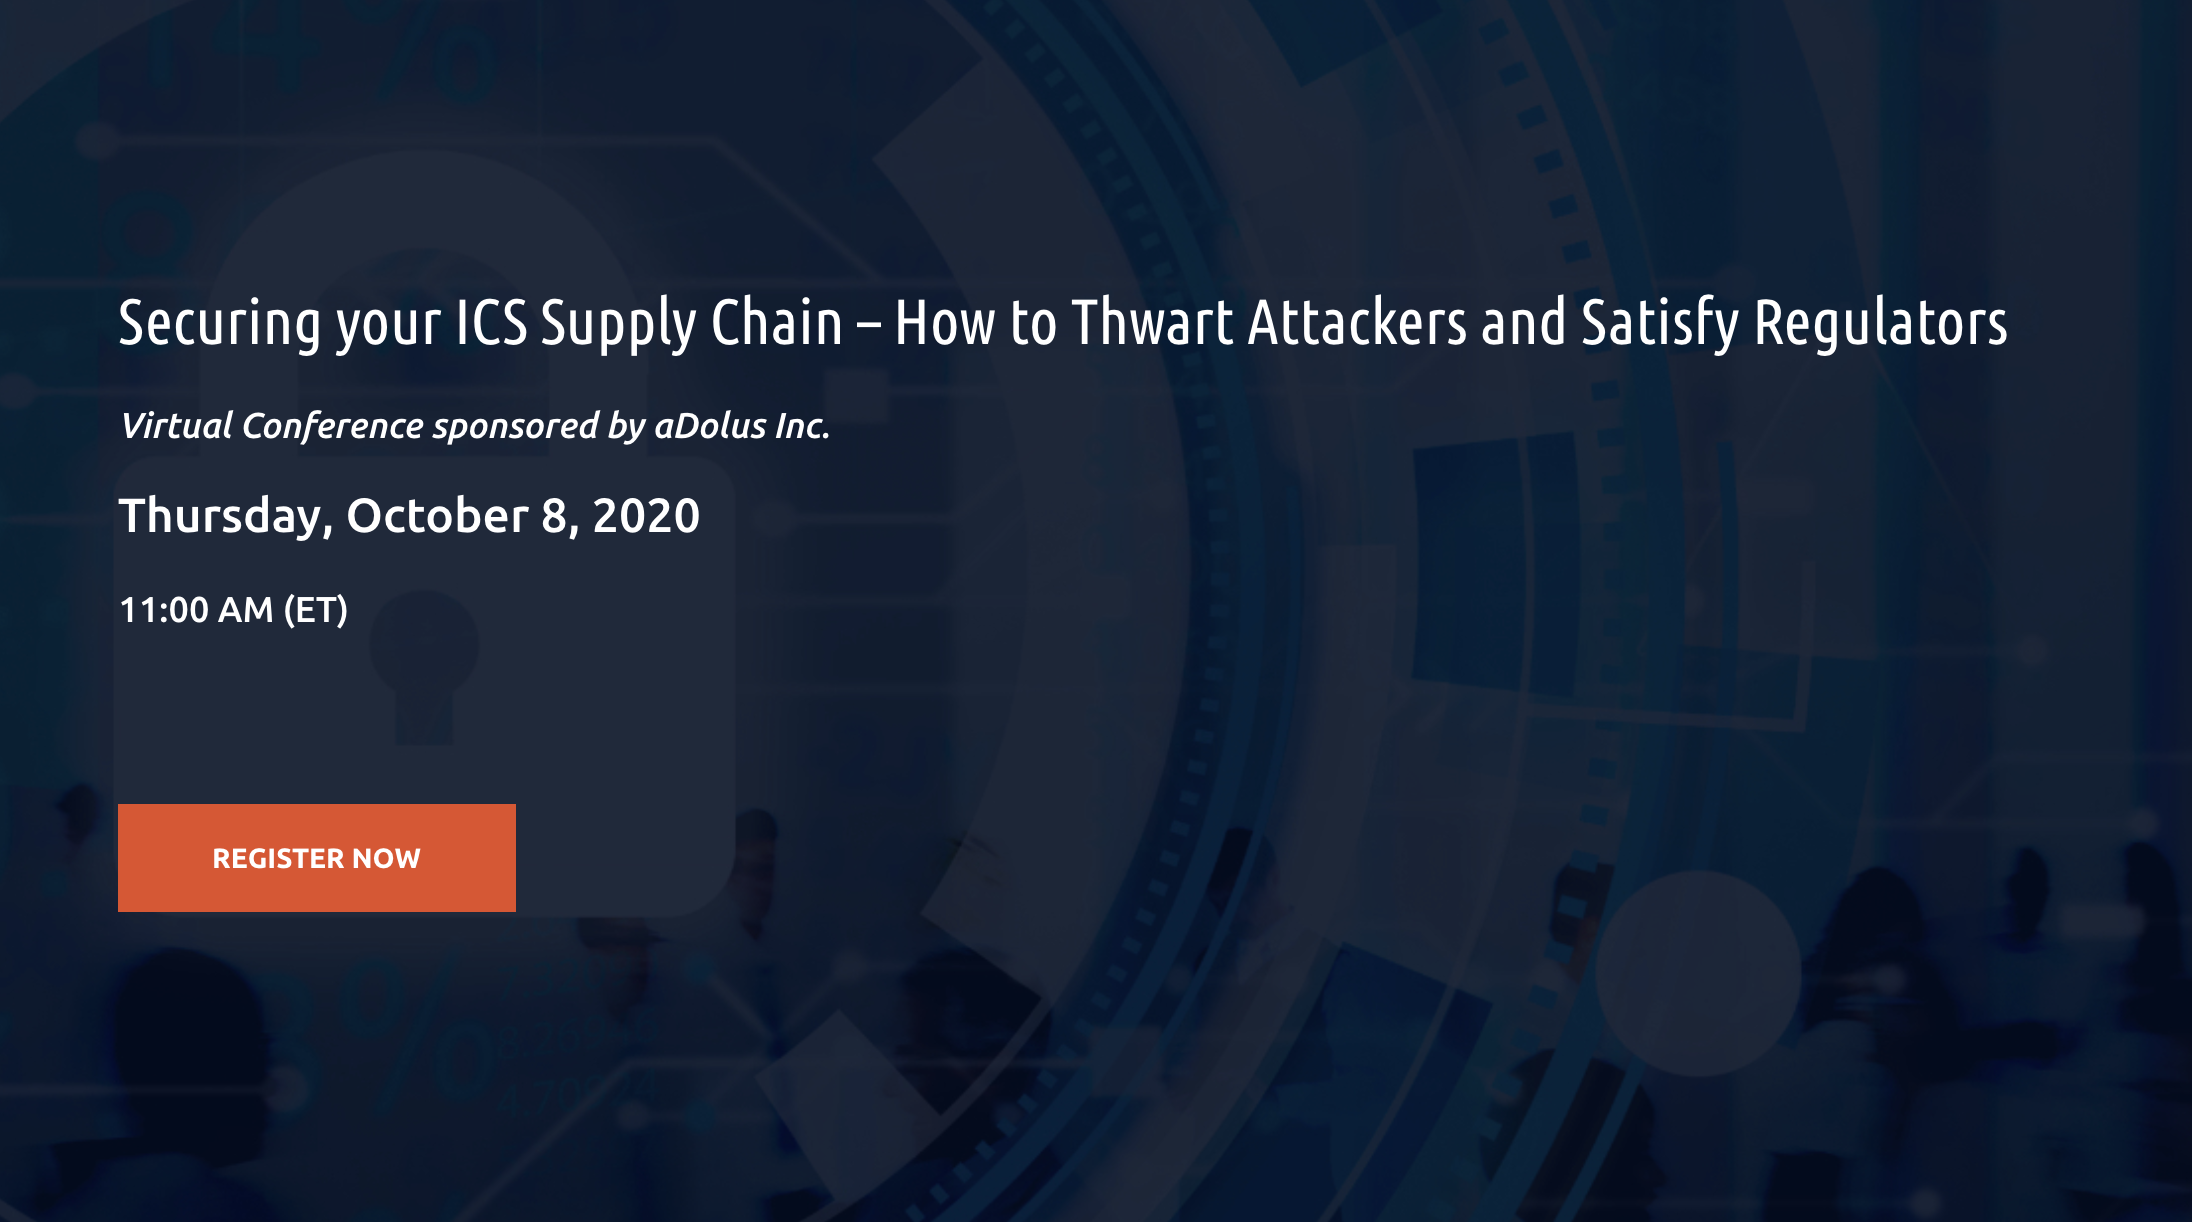 Securing your ICS Supply Chain – How to Thwart Attackers and Satisfy Regulators